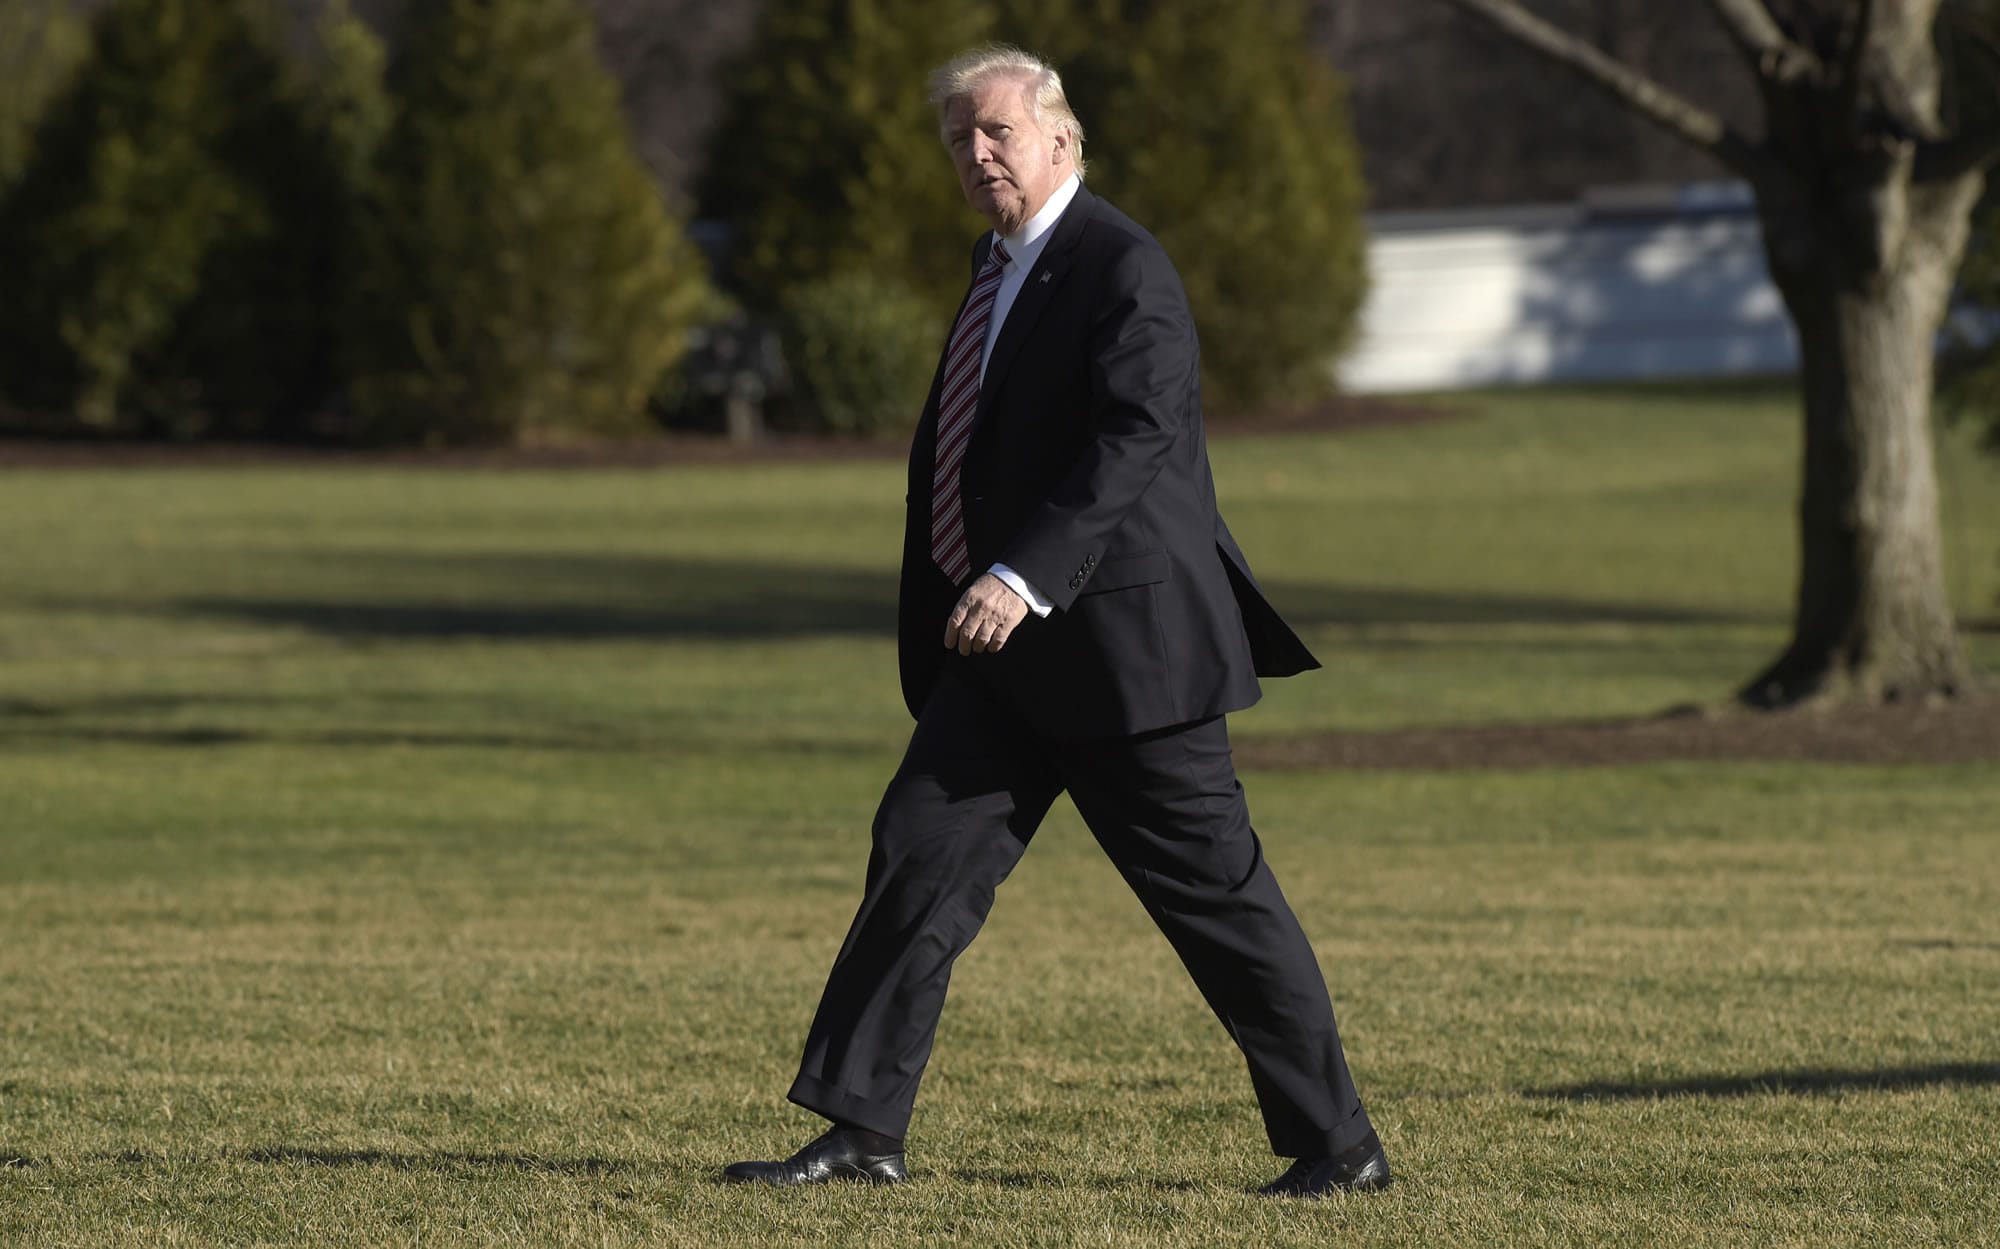 FILE - In this Thursday, Jan. 26, 2017, file photo, President Donald Trump walks on the South Lawn of the White House in Washington after returning from a trip to Philadelphia. Lawmakers in Massachusetts and other Democratic-leaning states are considering ways to flex their muscles in response to the policies of President Donald Trump. House Democrats have scheduled an unusual caucus for Wednesday, Feb. 8, 2017, at the Statehouse to discuss a response to "recent actions" by the Trump administration.